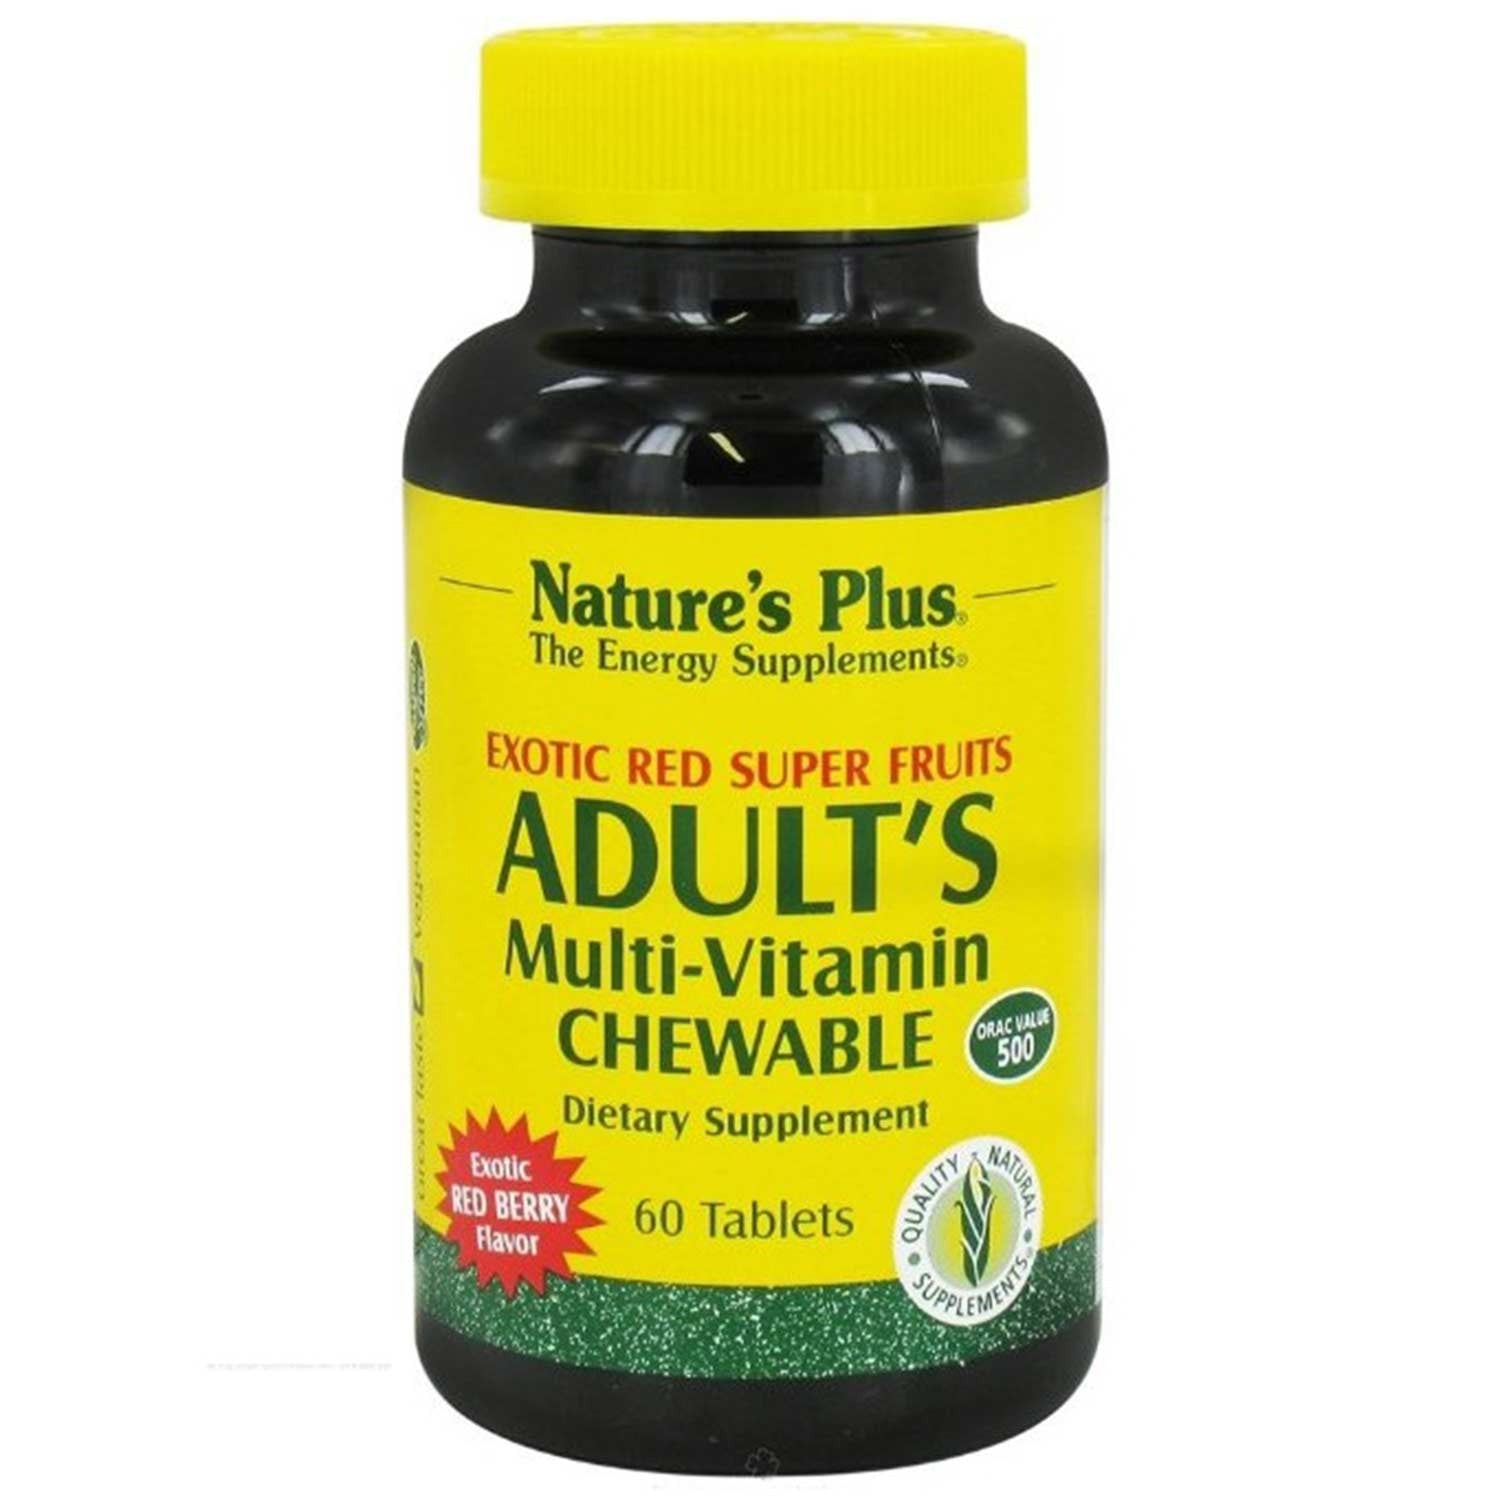 Natures Plus Adult's Multi-Vitamin Chewable - Exotic Red Super Fruits, 60 tabs.-NaturesWisdom